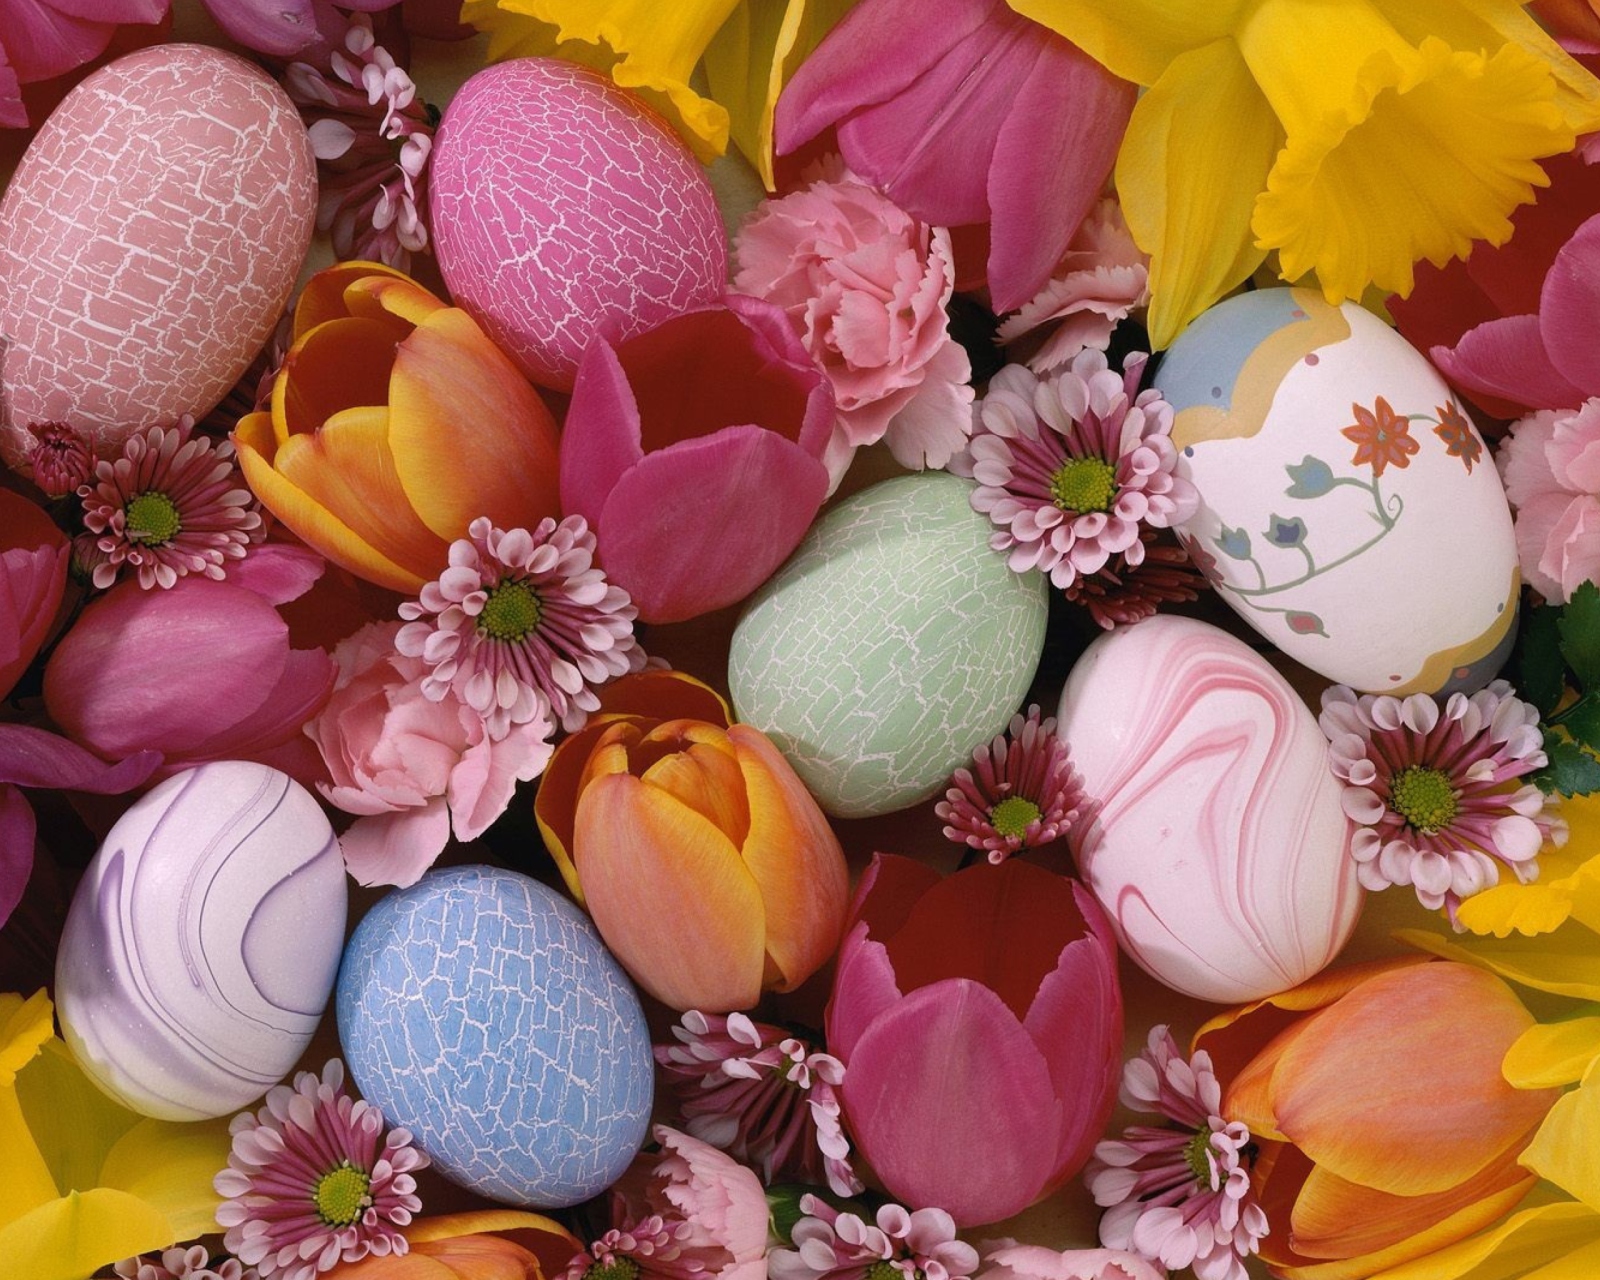 Das Easter Eggs And Flowers Wallpaper 1600x1280